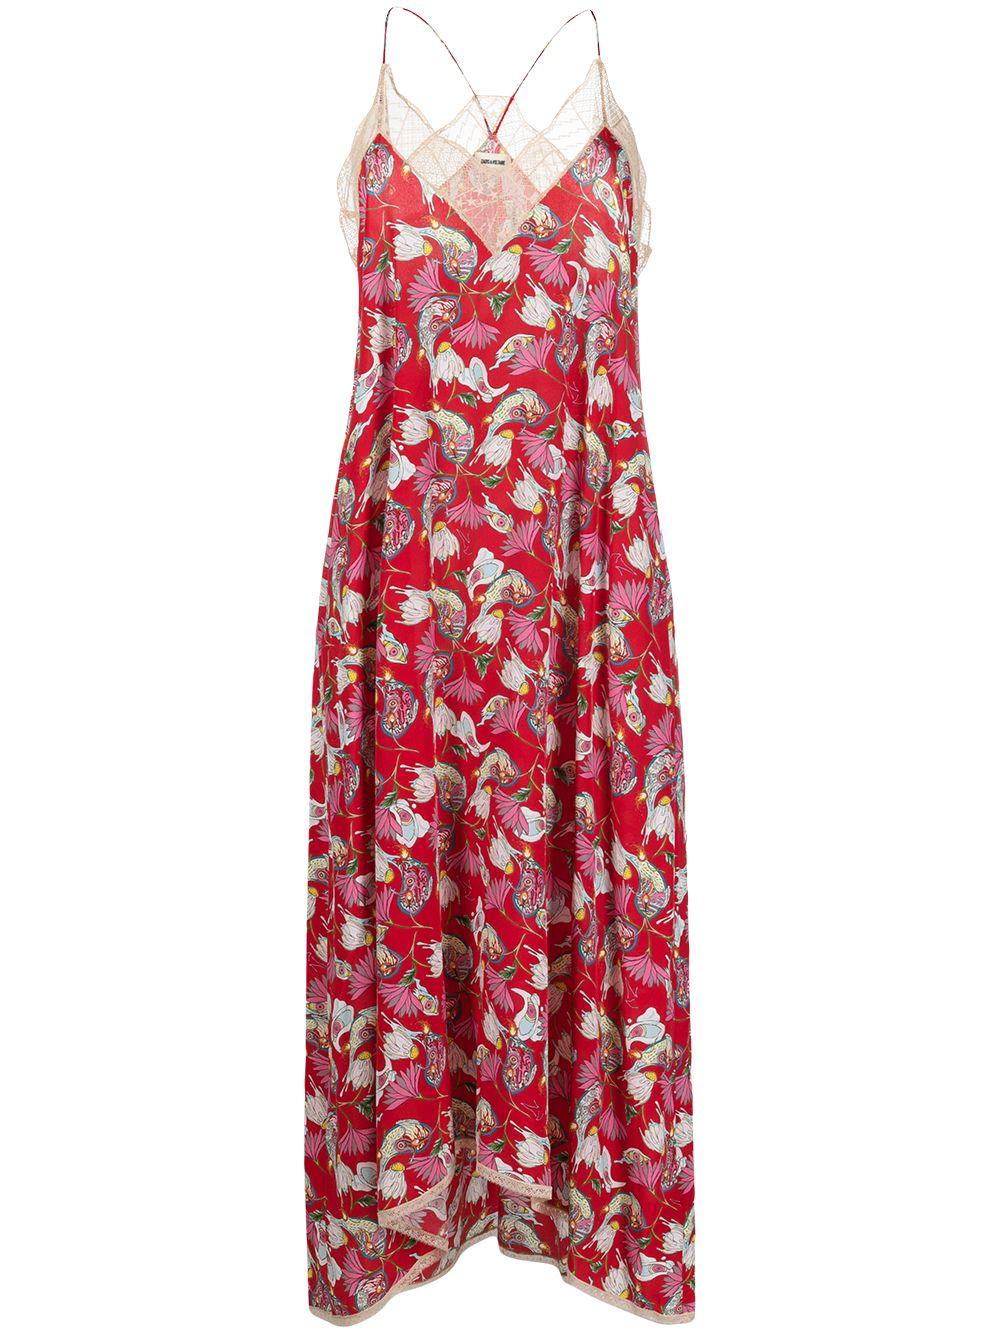 Zadig & Voltaire Risty Paisley Psyche Dress in Red | Lyst